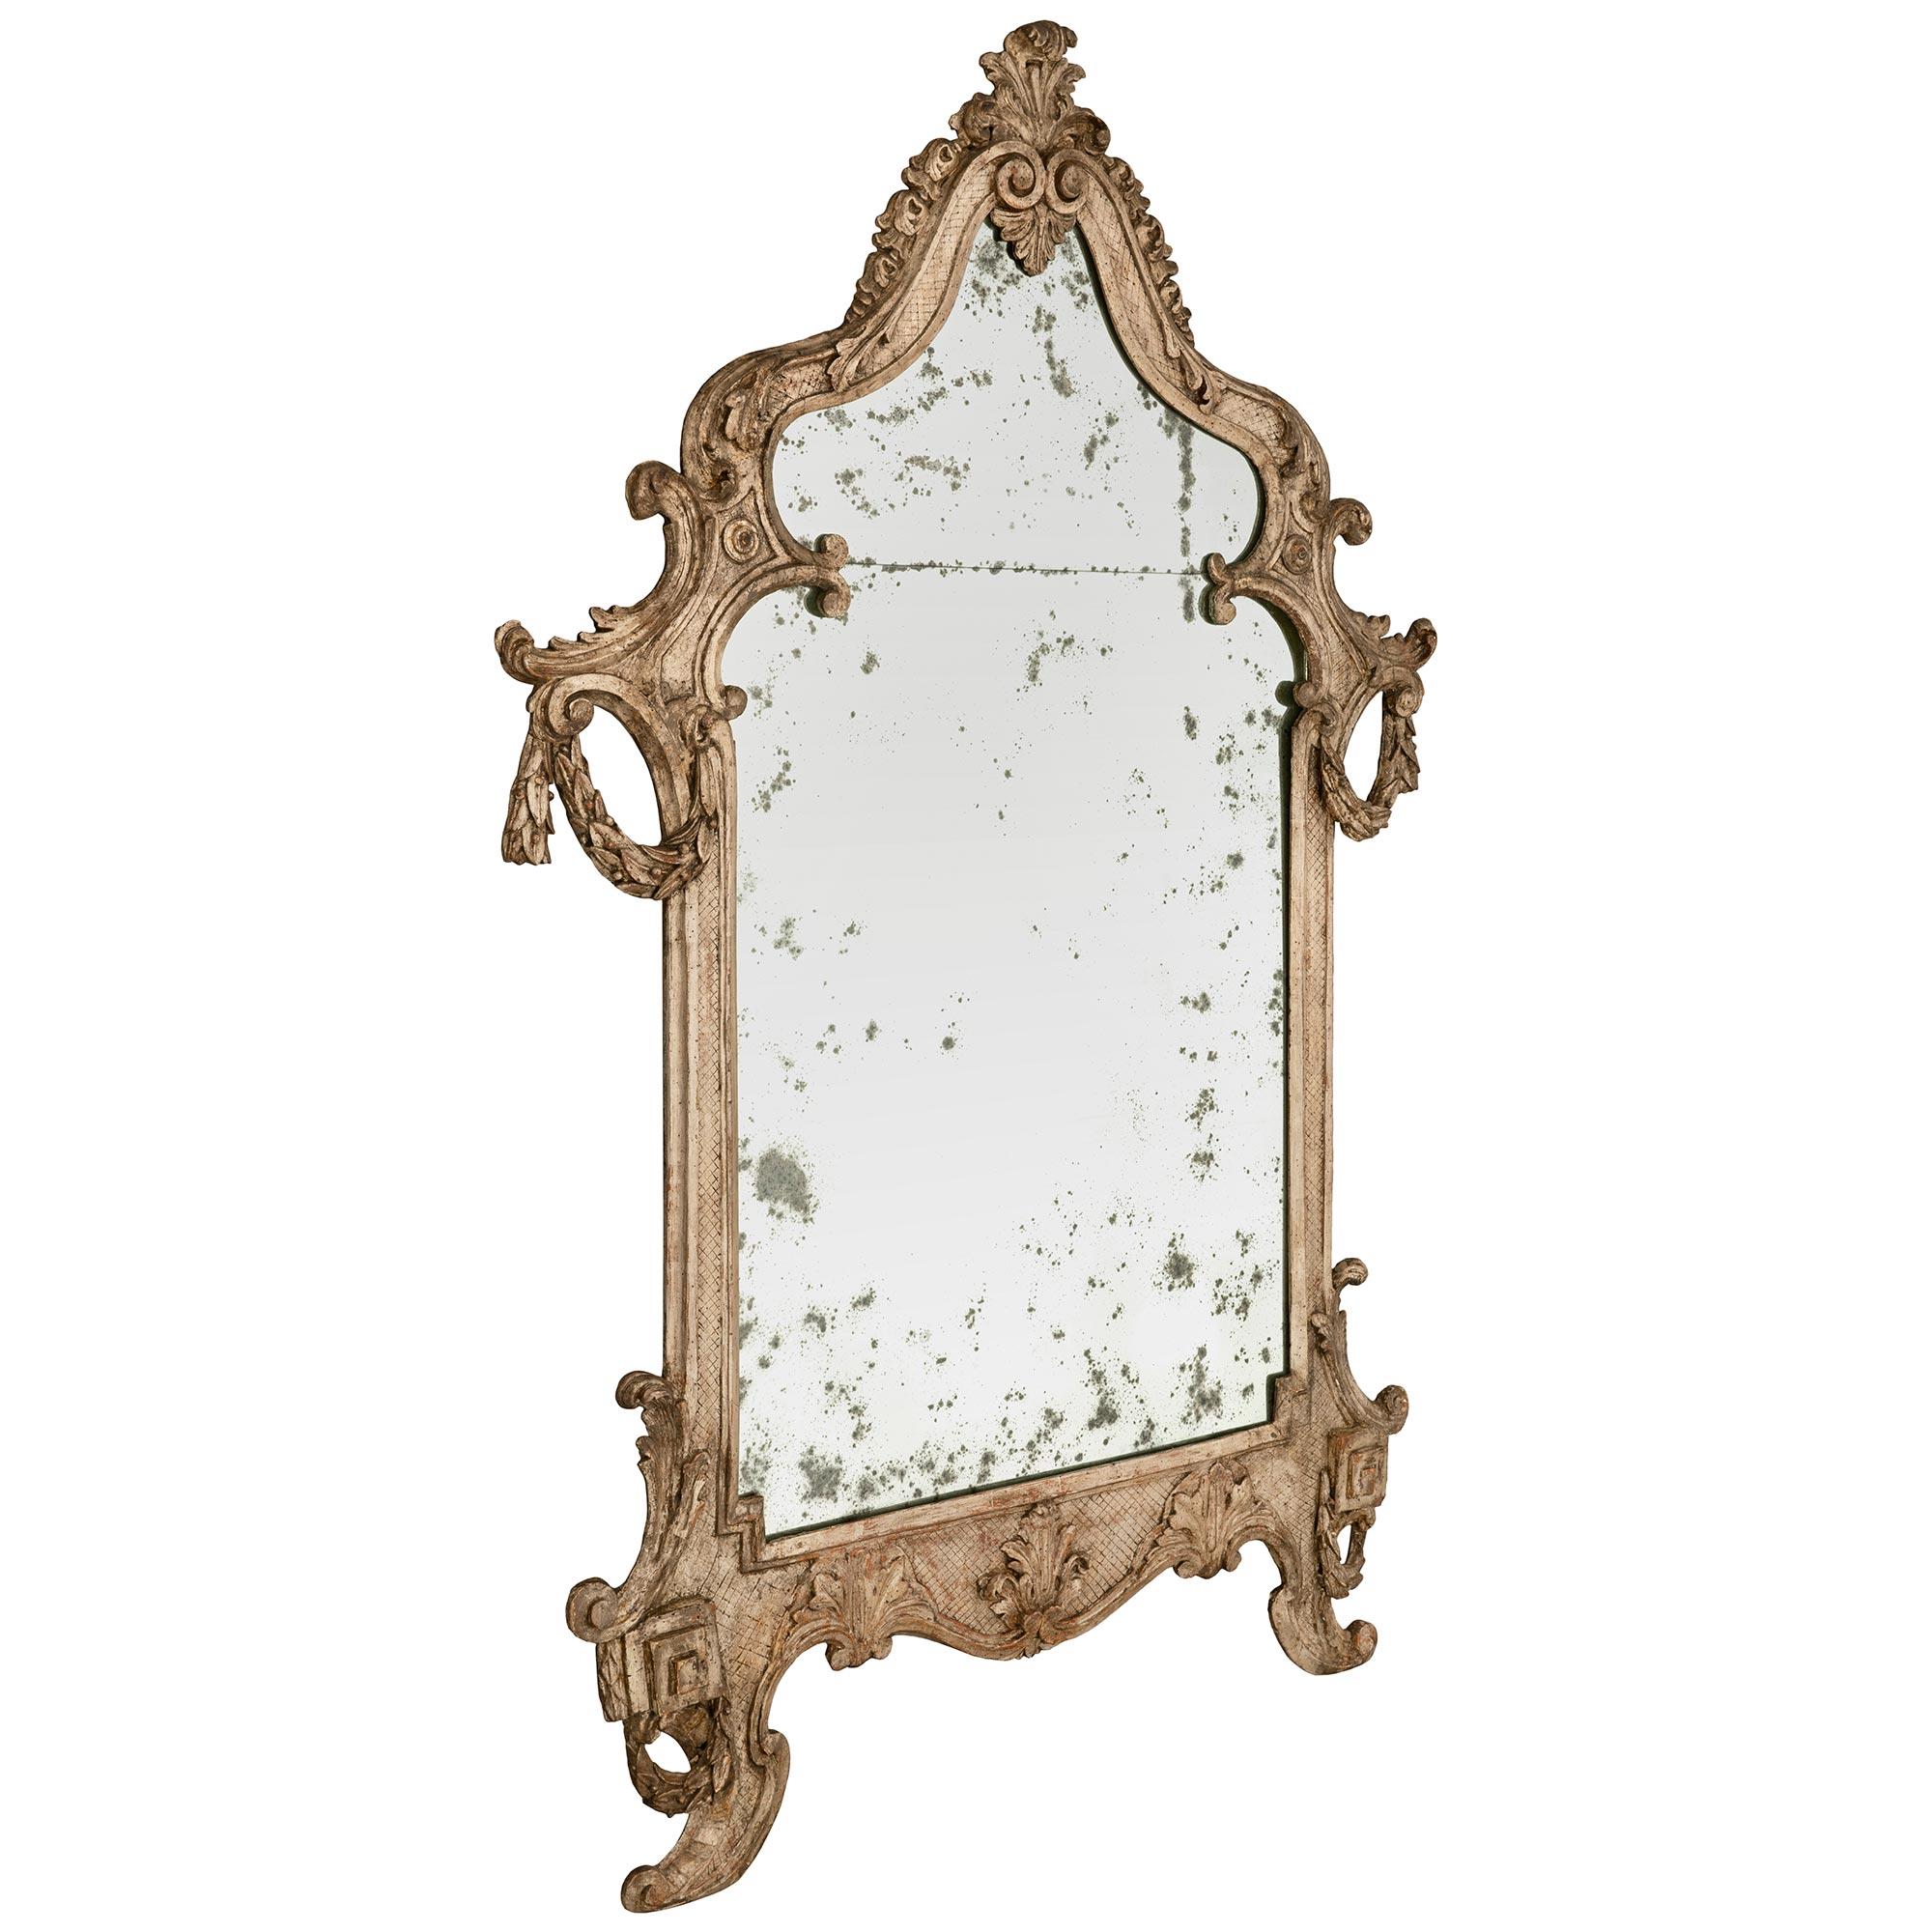 A very attractive Italian 18th century Louis XV period carved mecca mirror. This unique mirror has a lattice designed frame with scrolled feet, Greek key designs,and wreaths at each bottom corner. The scalloped bottom has scrolled edges and large